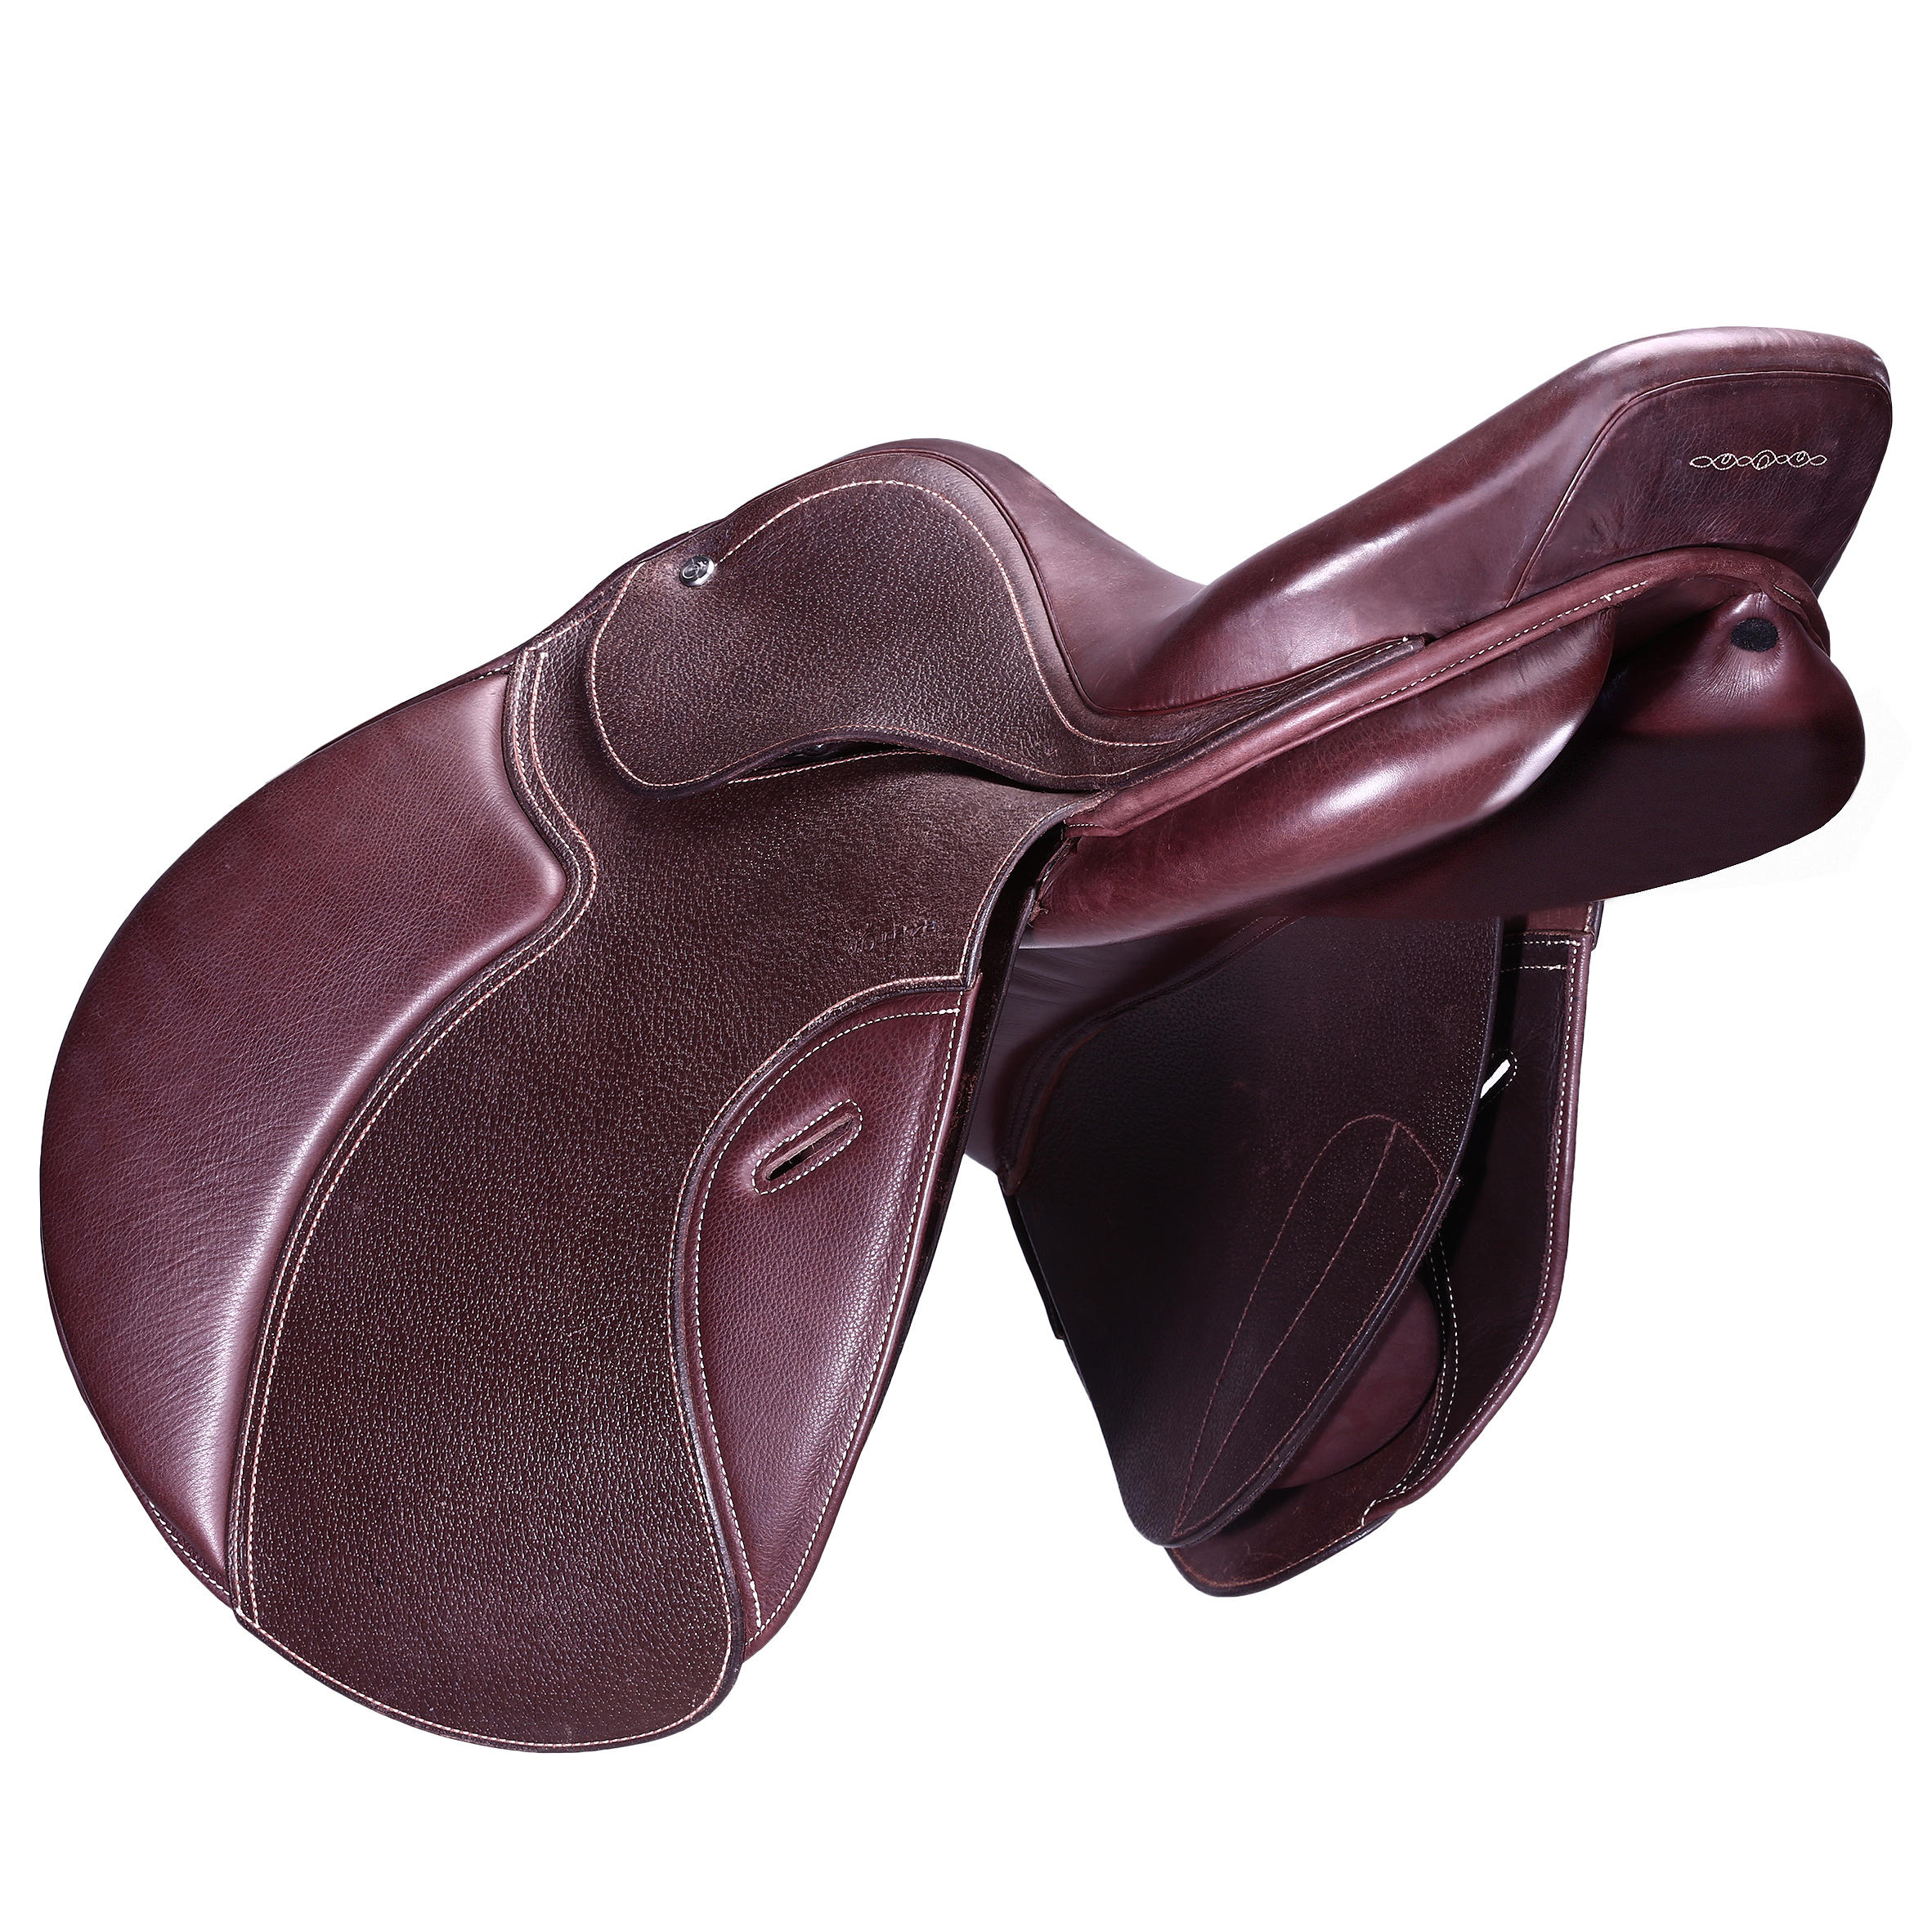 17.5" Versatile Leather Horse Riding Saddle for Horse - Brown 2/15